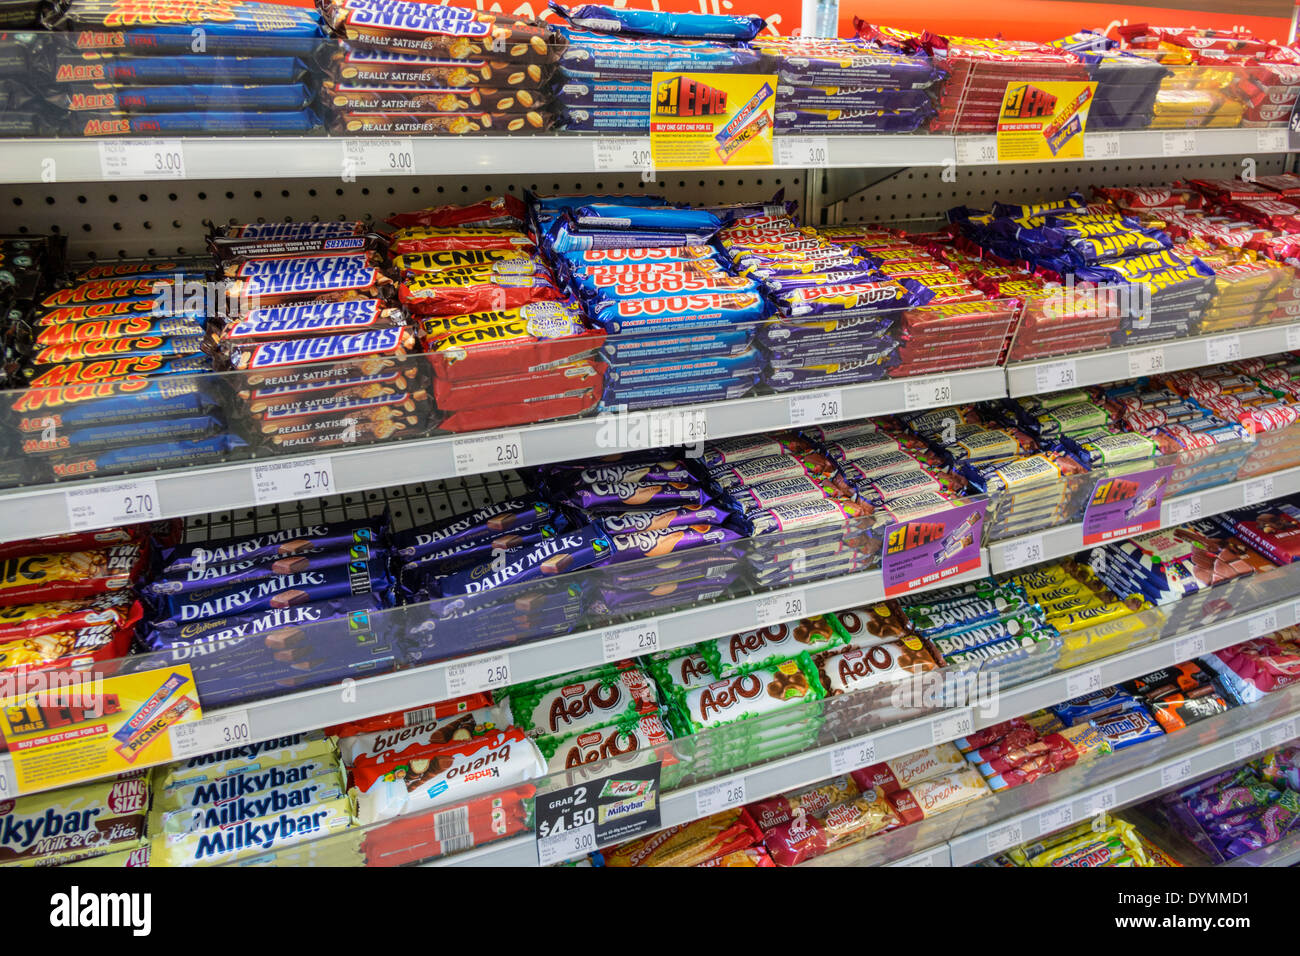 Australian Candy High Resolution Stock Photography and Images - Alamy